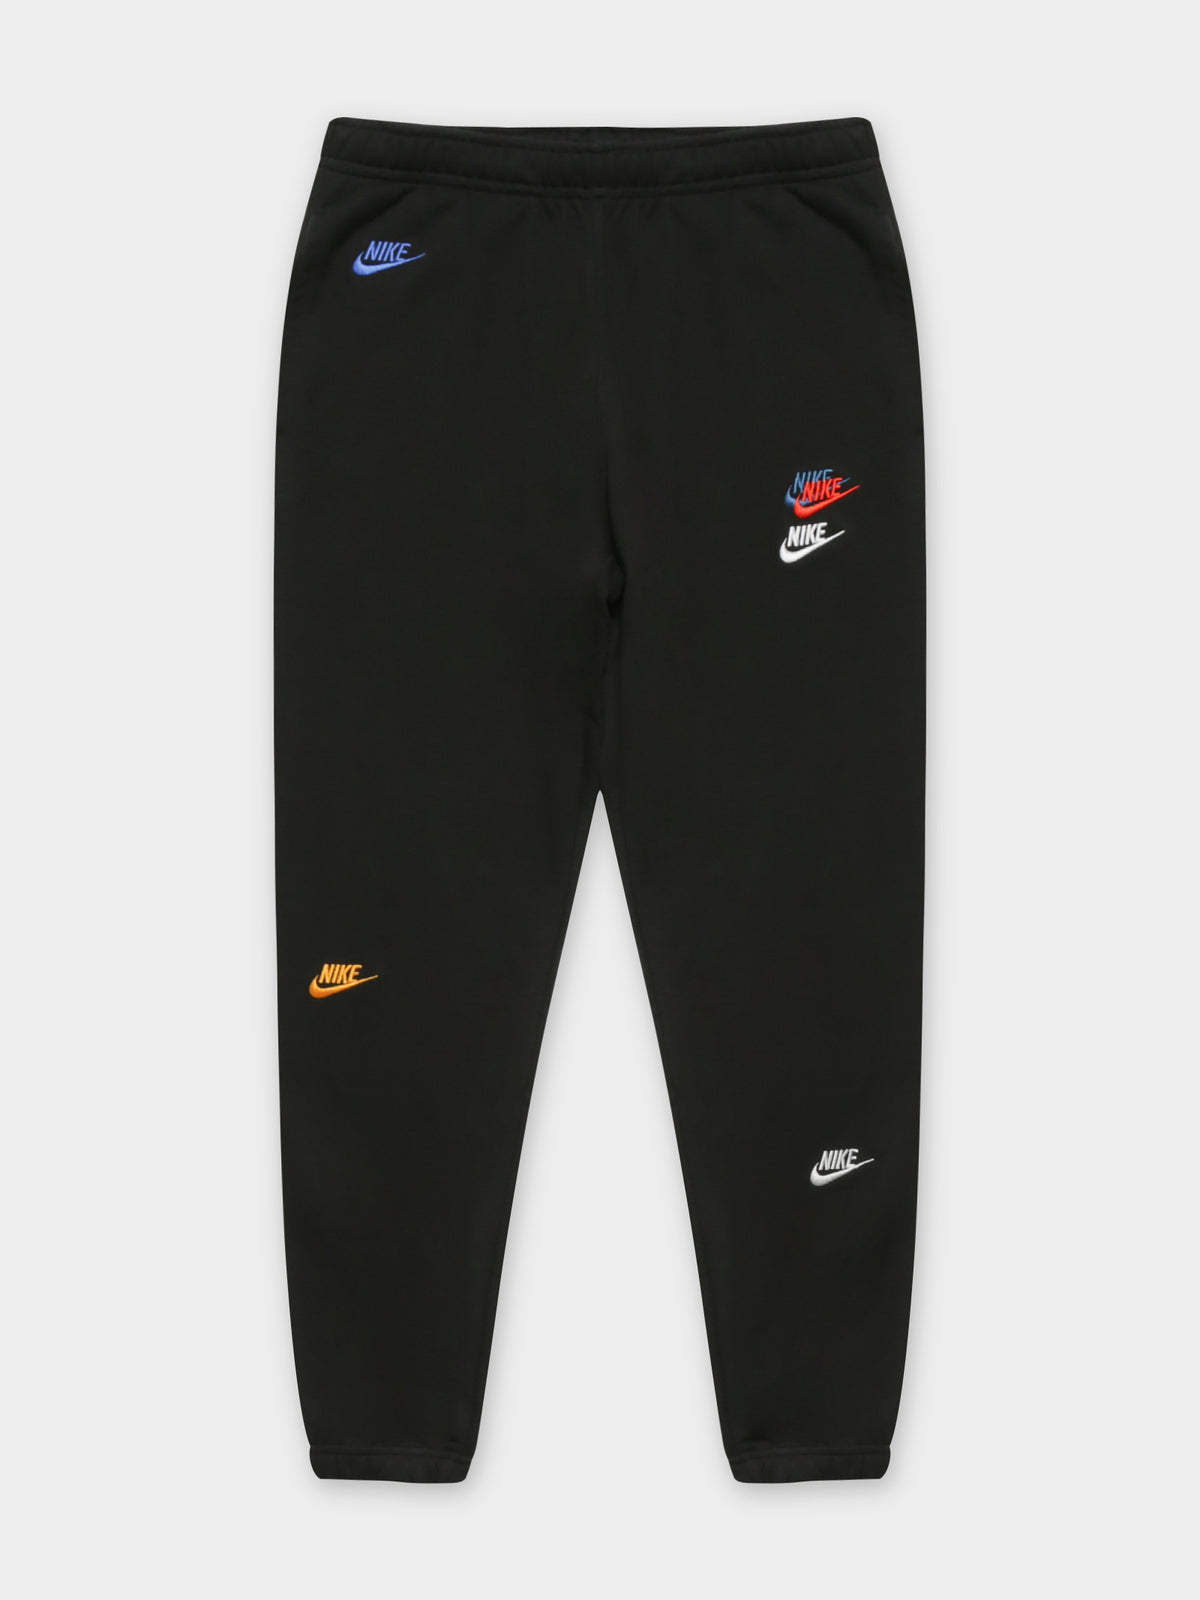 NSW Club Essentials Trackpants in Black